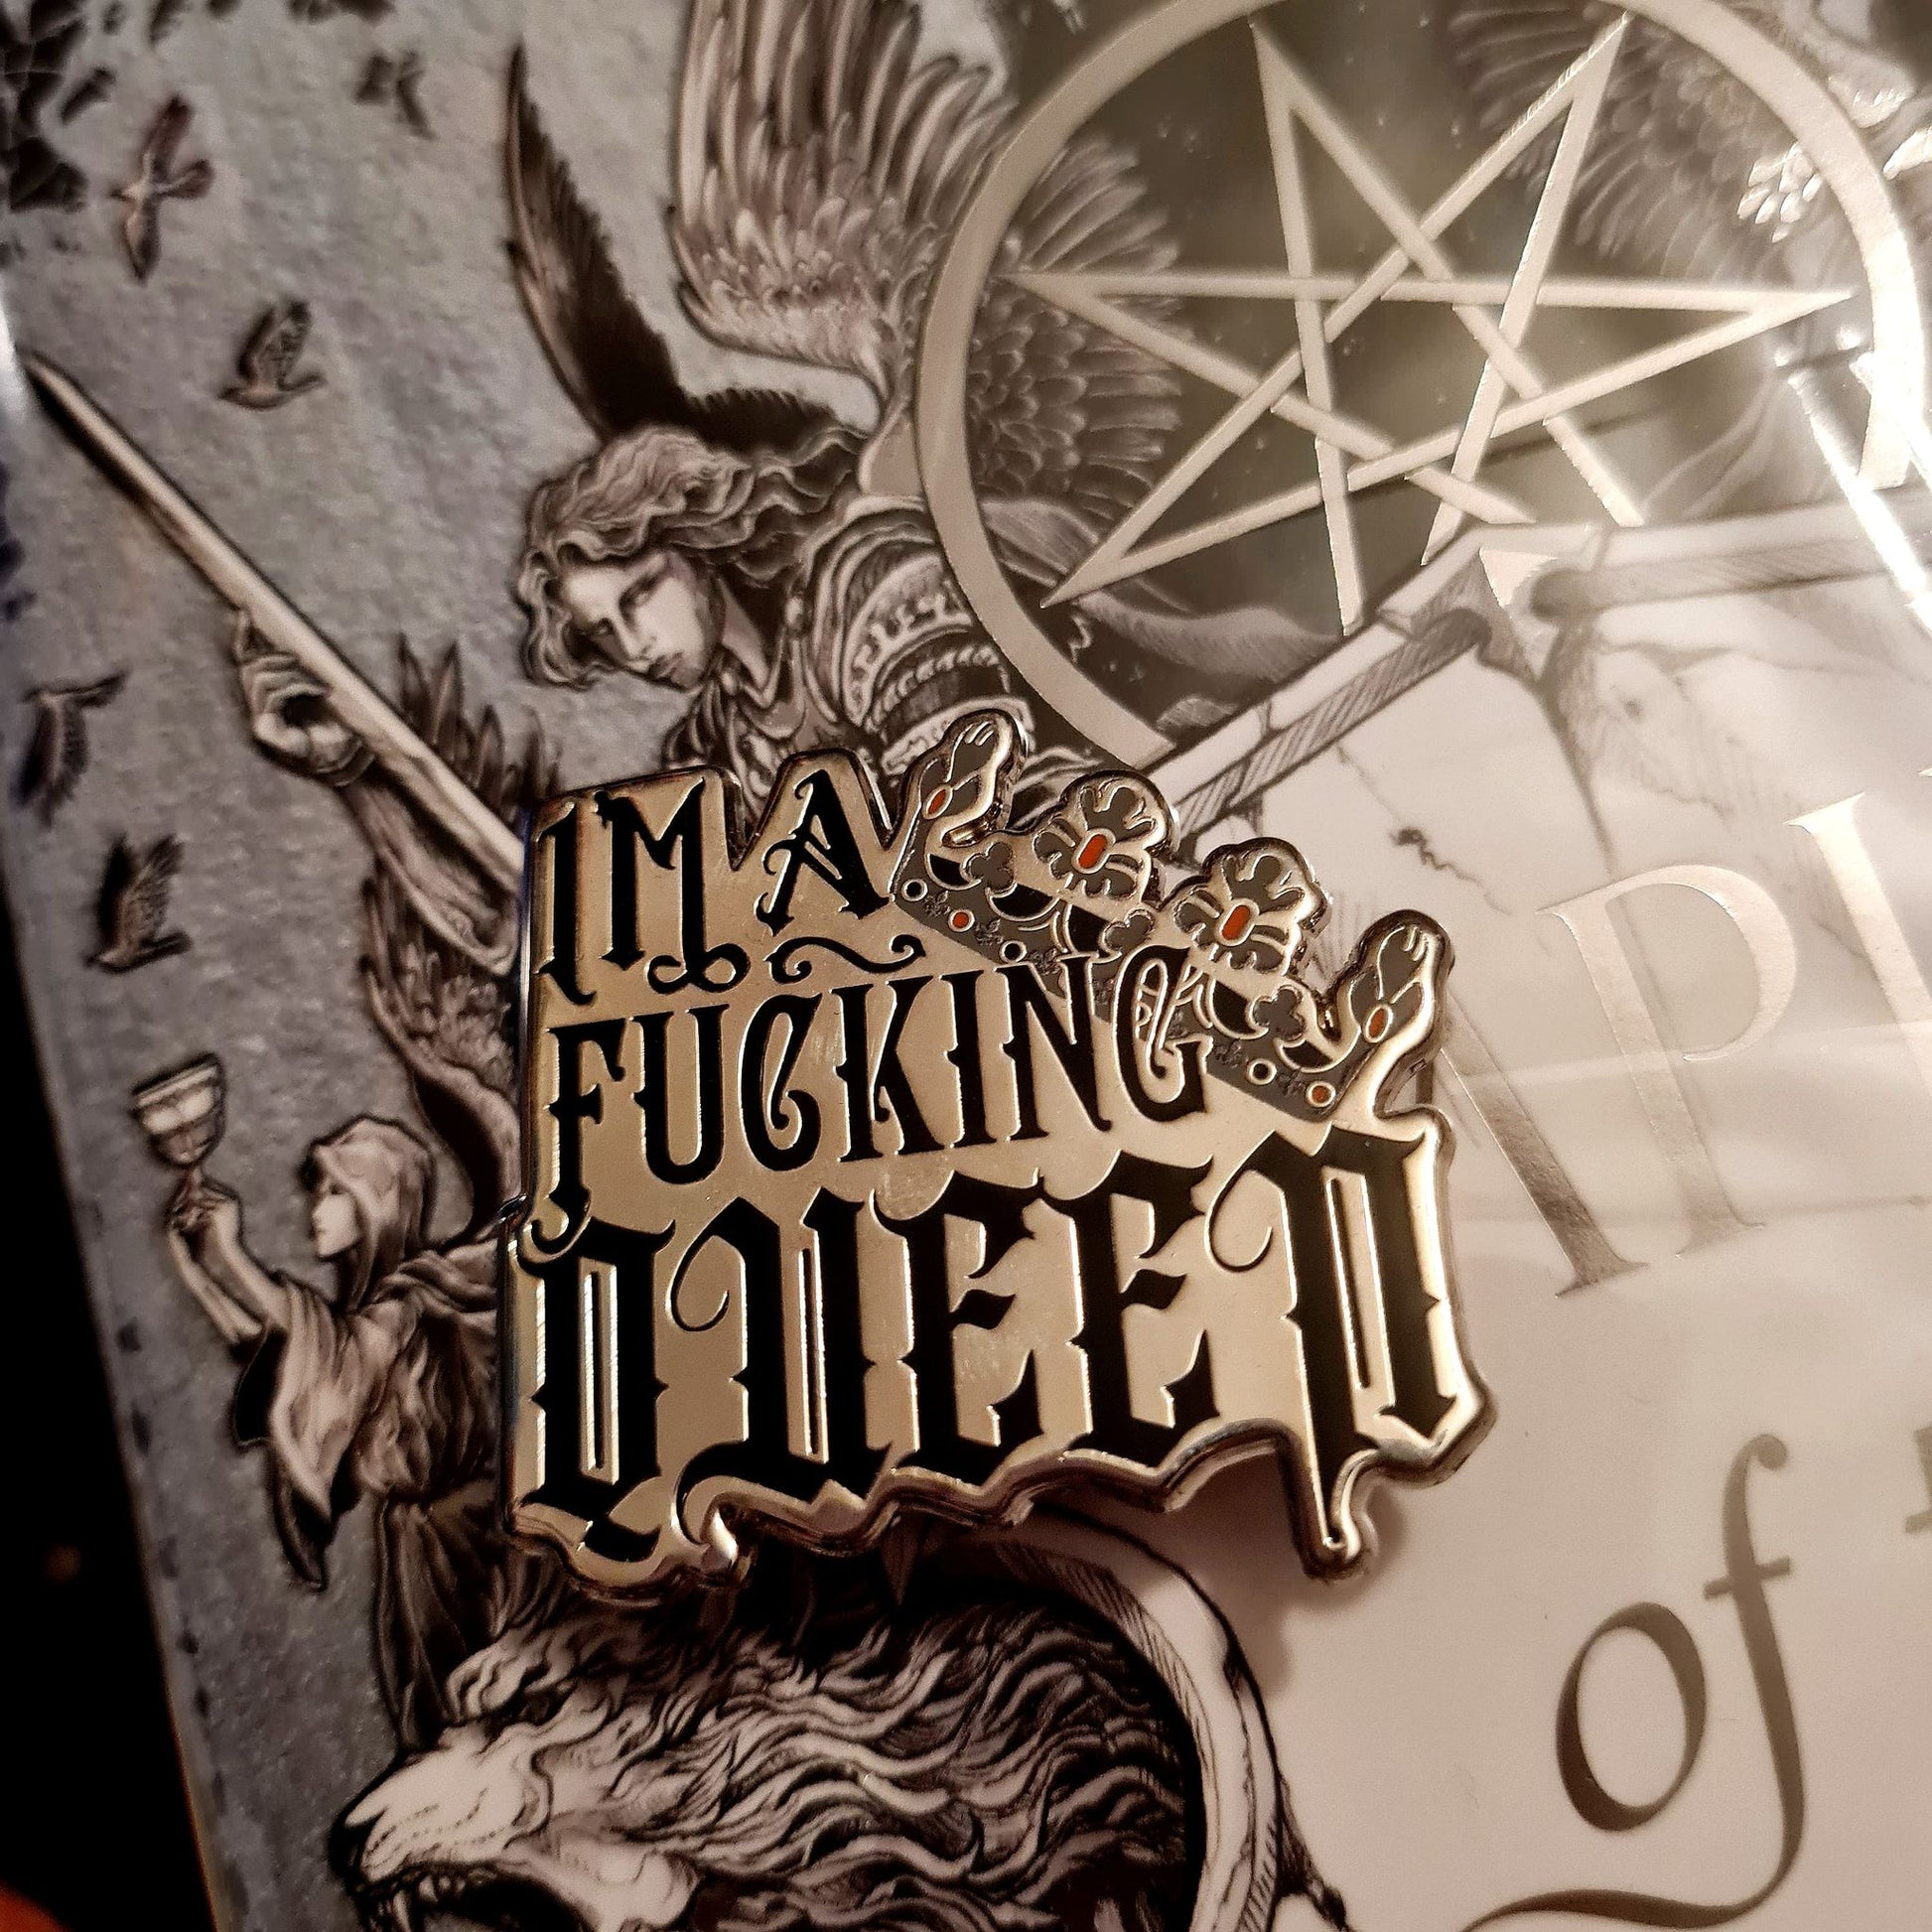 I'm A Fucking Queen enamel pin inspired by The Empire of the Vampire by Jay Kristoff